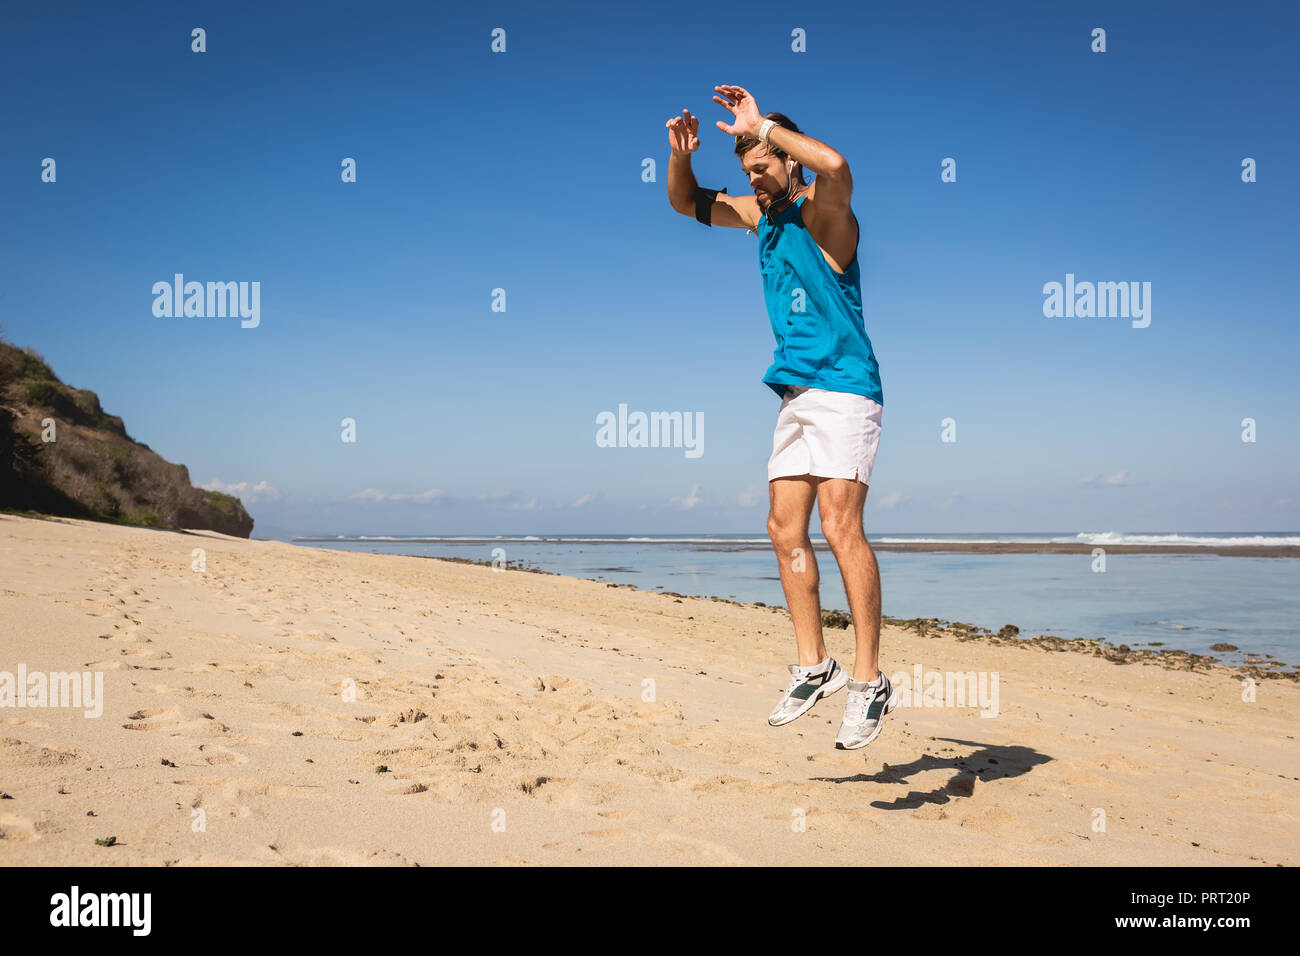 young athletic man jumping on sandy beach near sea Stock Photo